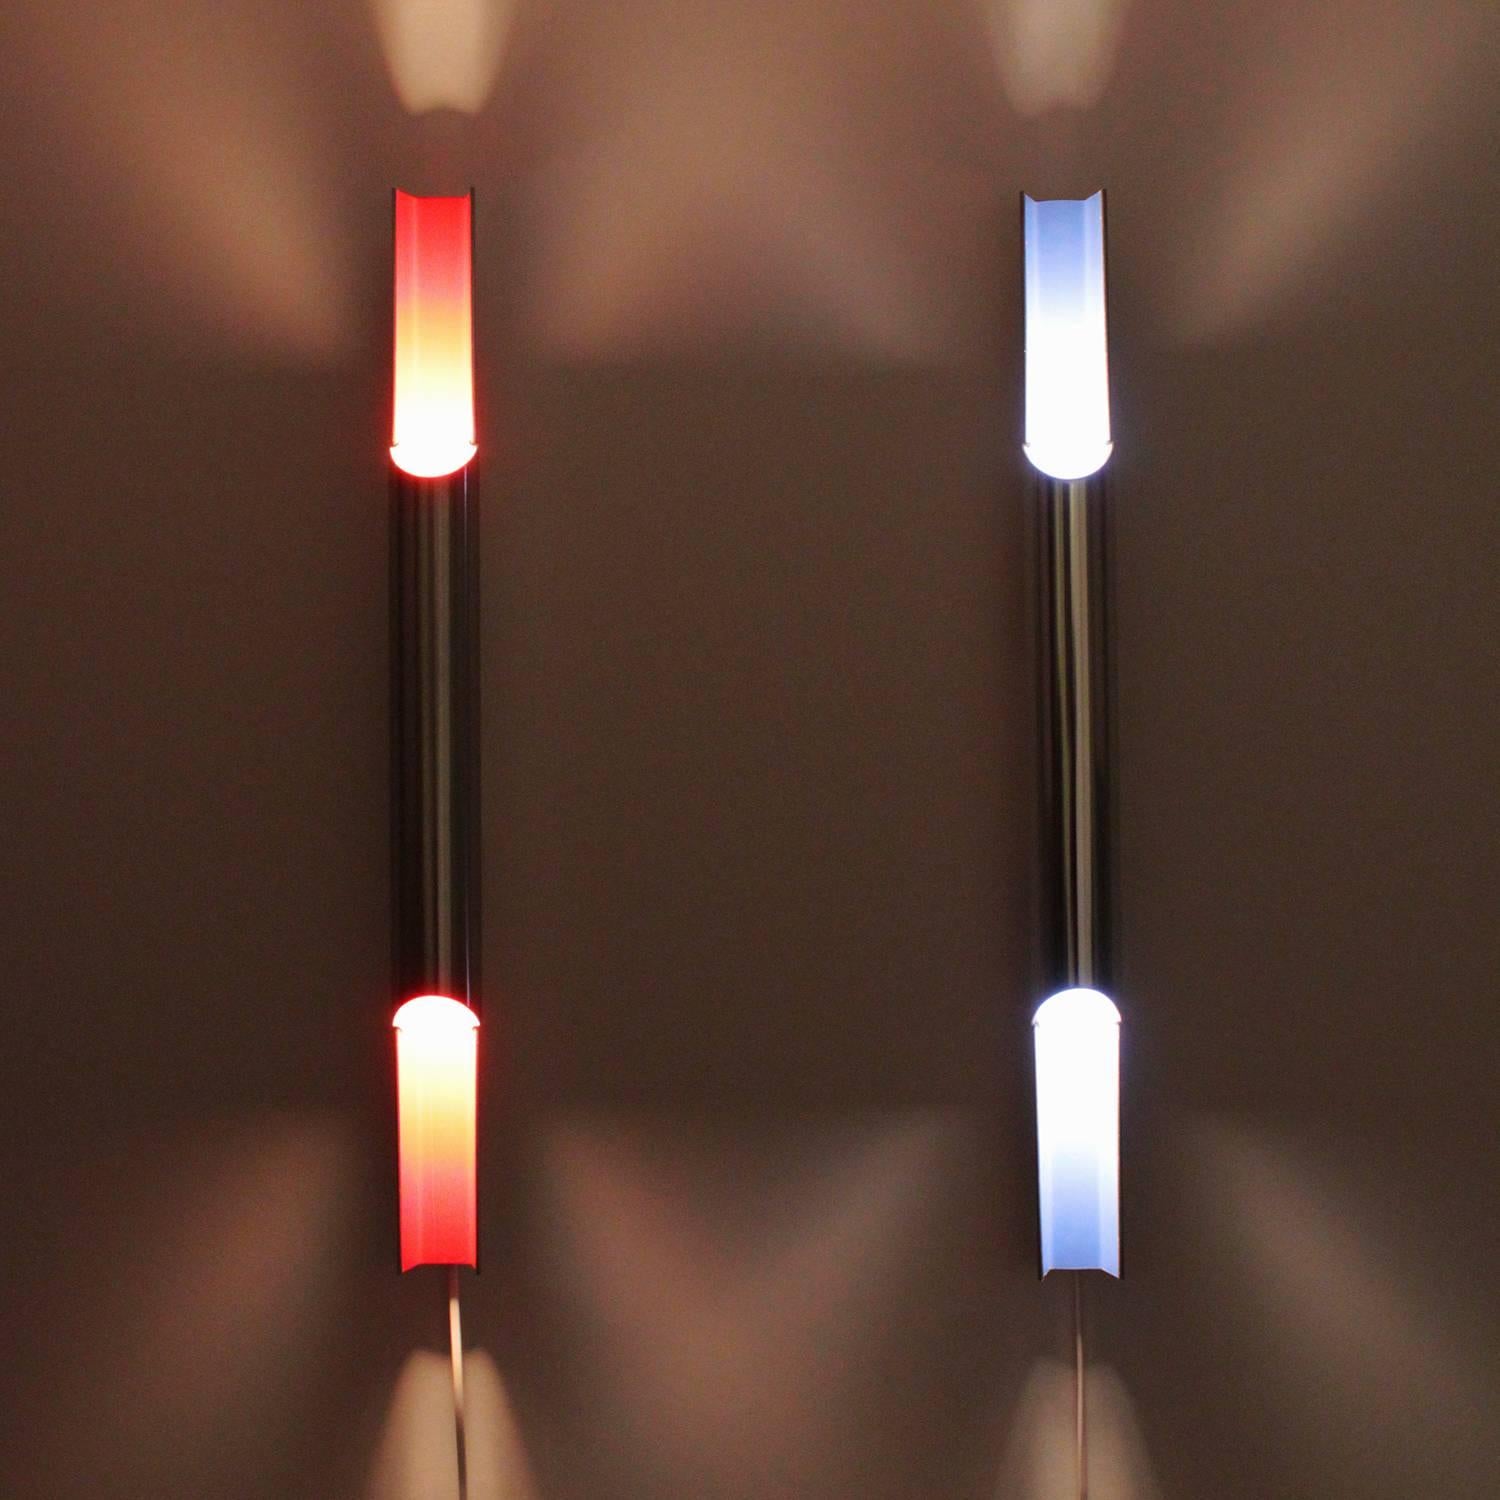 PAN-OPTICON - a fantastic pair of sconces, designed by Bent Karlby in 1968-1969 and produced by Lyfa.

A set of two polished narrow aluminum "PAN flute" pipes with a rounded polished aluminum cover and a matte inner coating one with blue